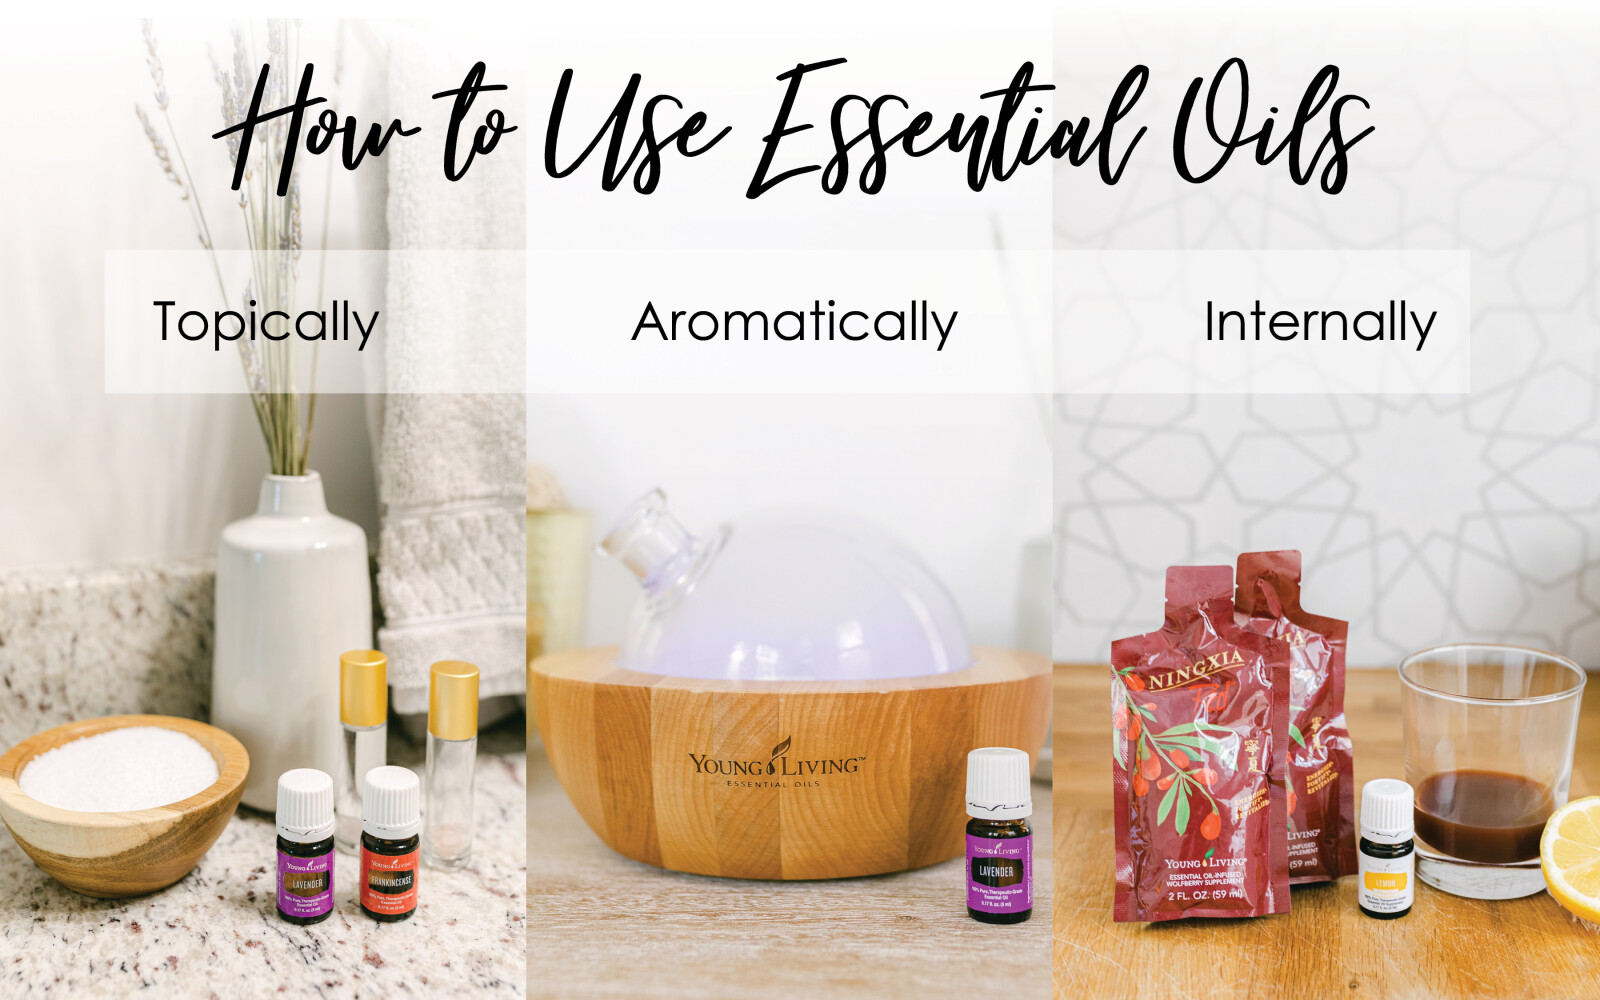 Internal Use of Essential Oils